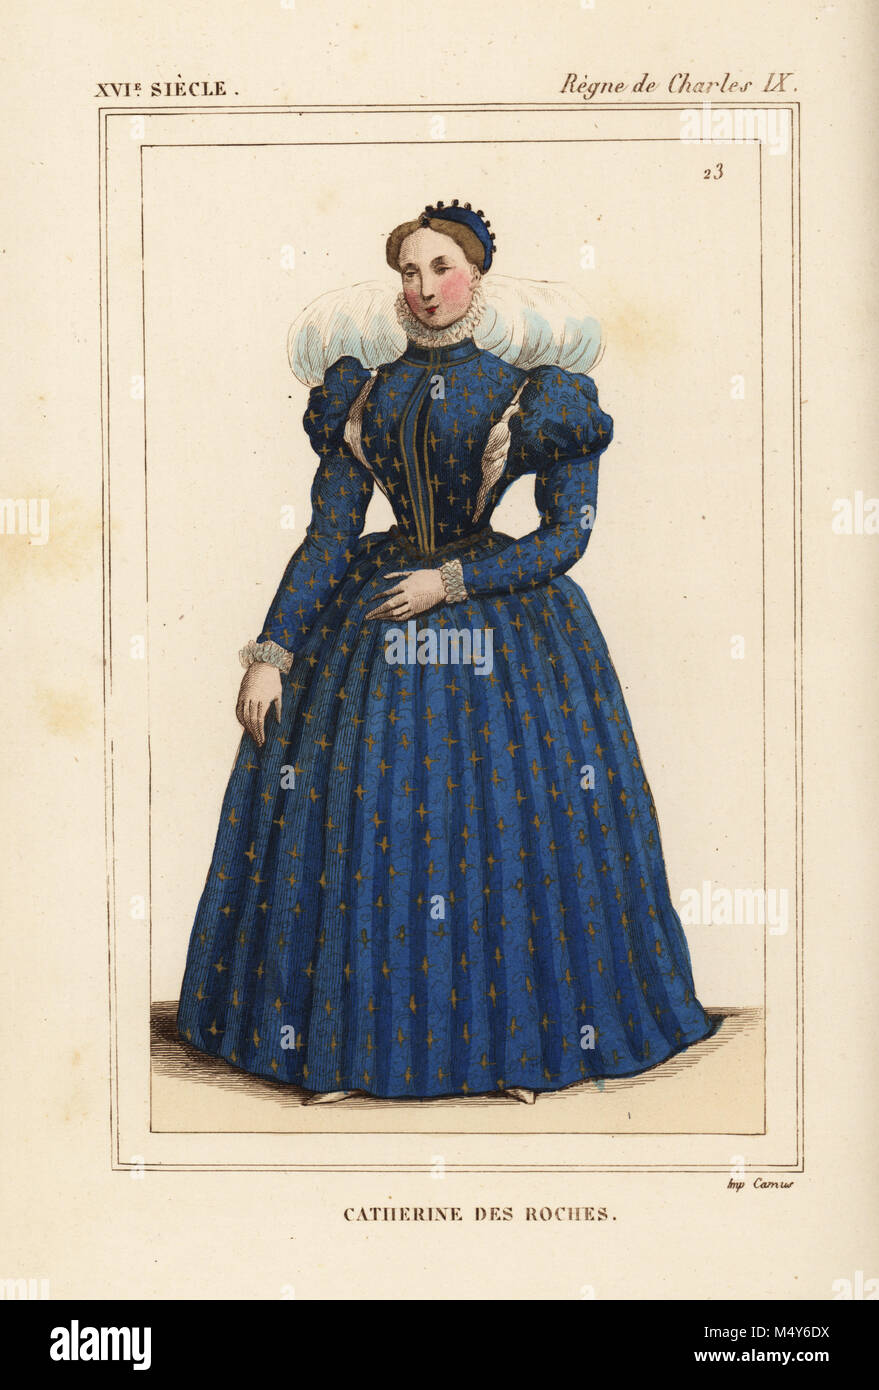 Catherine des Roches, daughter of Madeleine Neveu, writer, reign of King Charles IX of France. Handcoloured lithograph after a portrait in Roger de Gaignieres' gallery portfolio IX 44 from Le Bibliophile Jacob aka Paul Lacroix's Costumes Historiques de la France (Historical Costumes of France), Administration de Librairie, Paris, 1852. Stock Photo